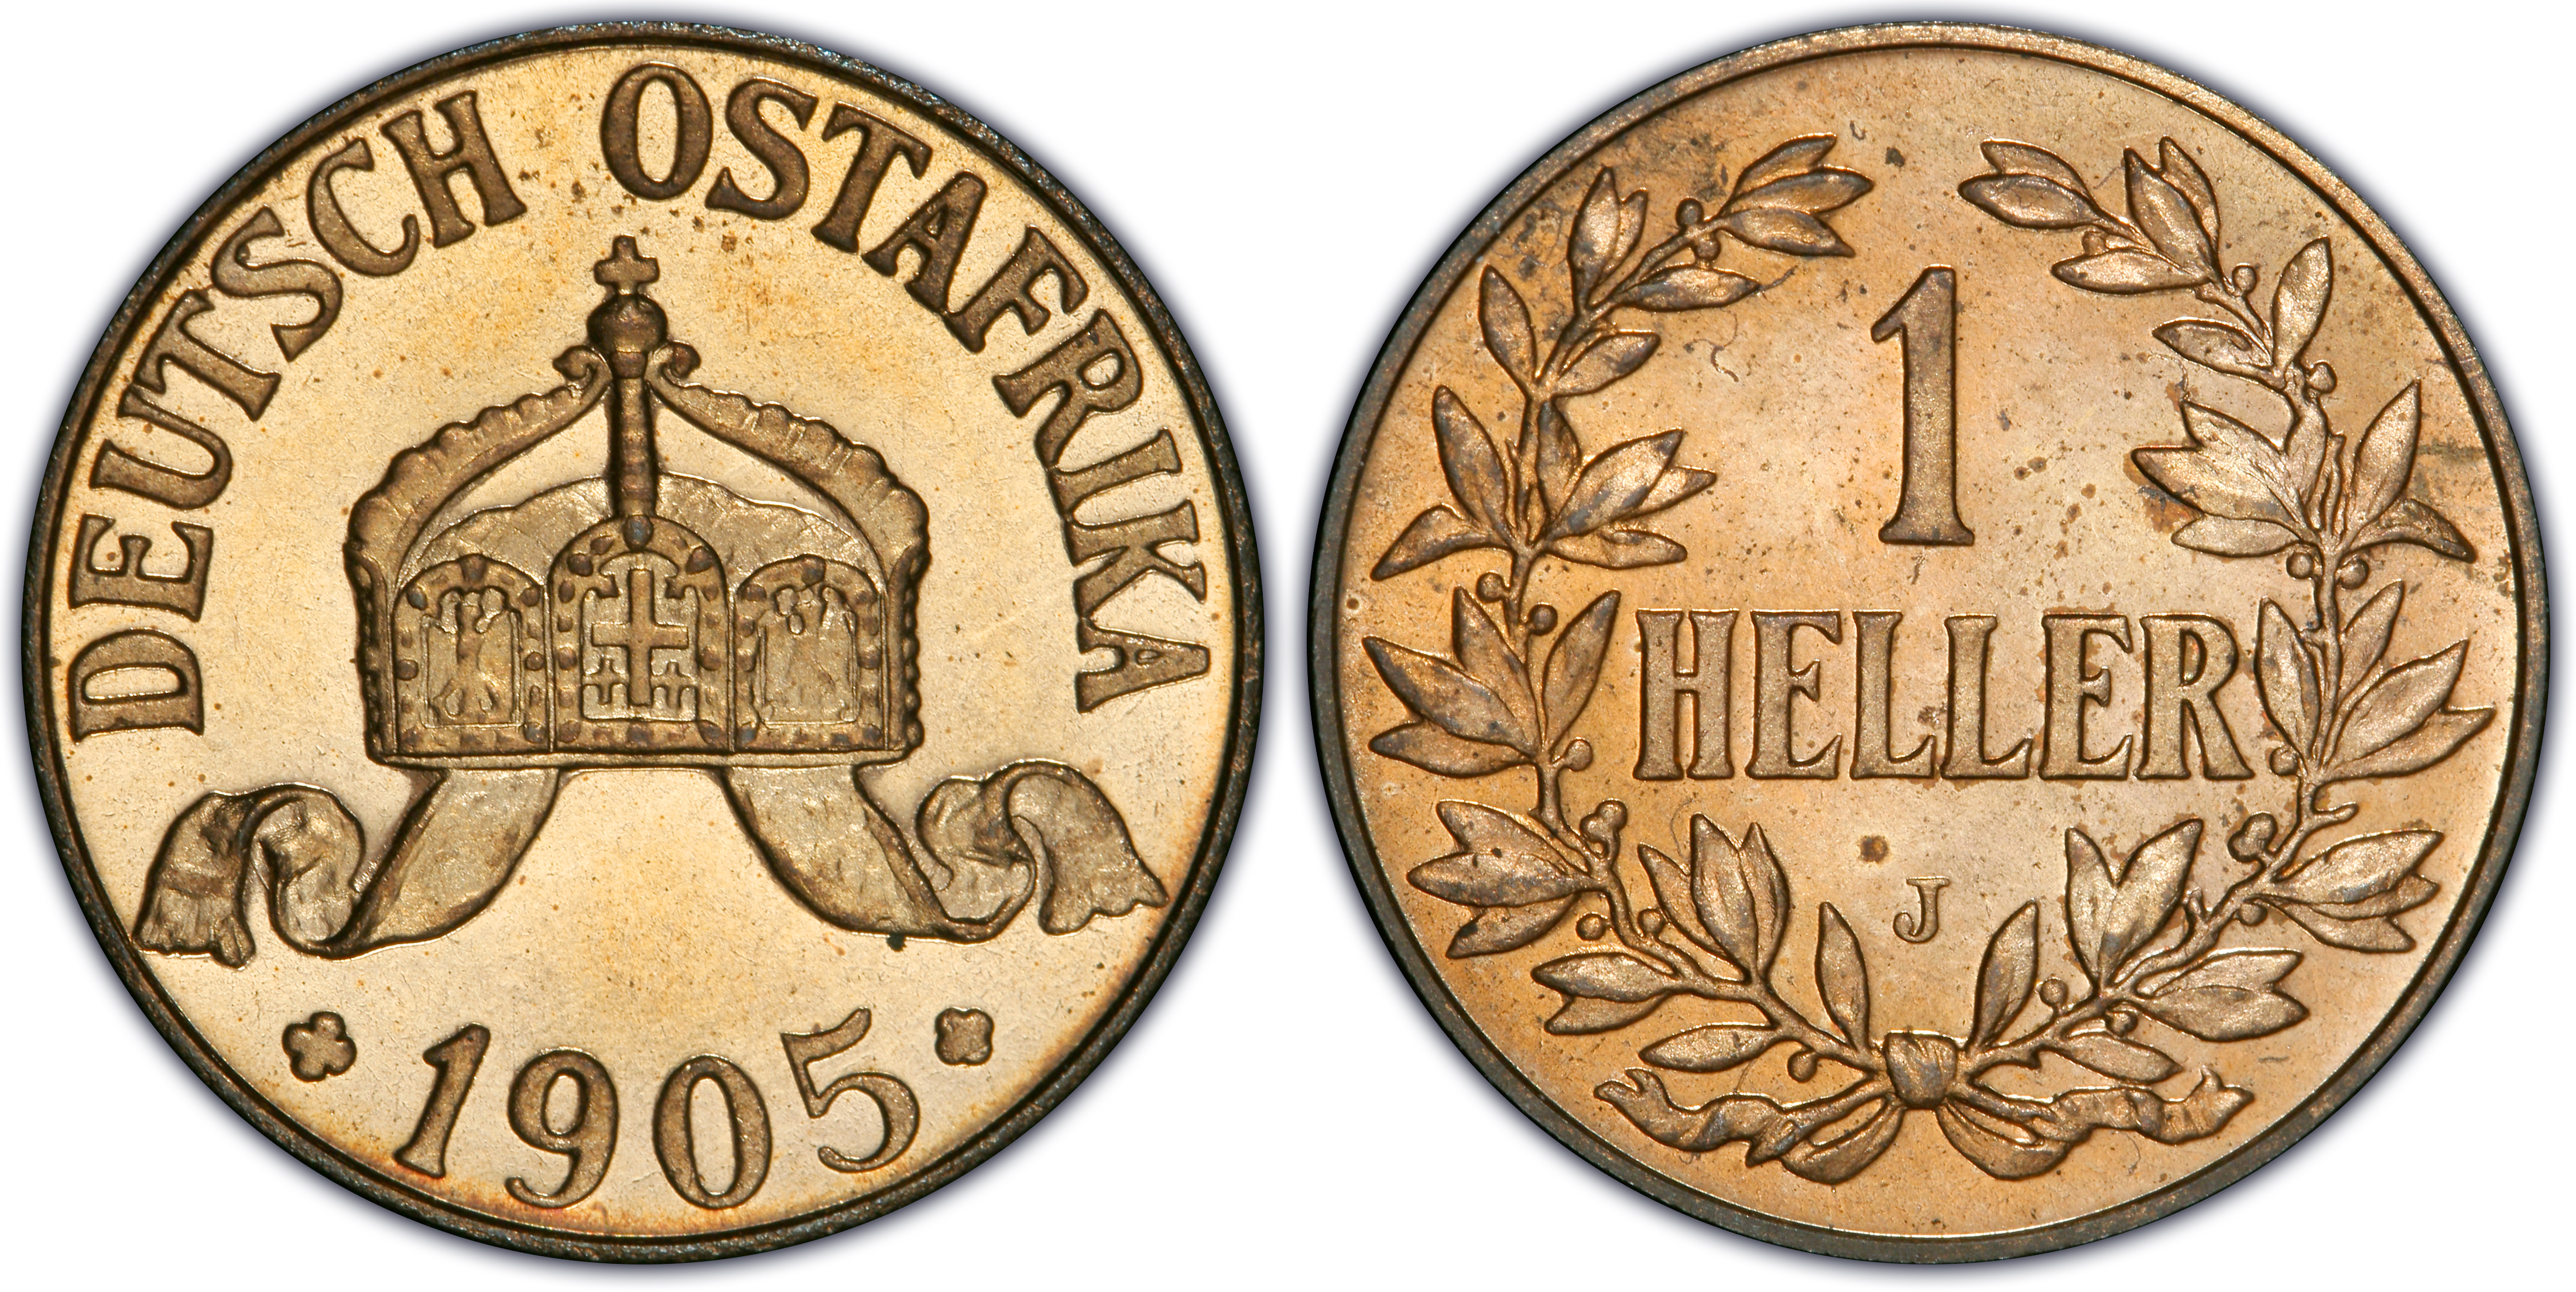 PCGS Set Registry - Collectors Showcase: German East Africa Collection